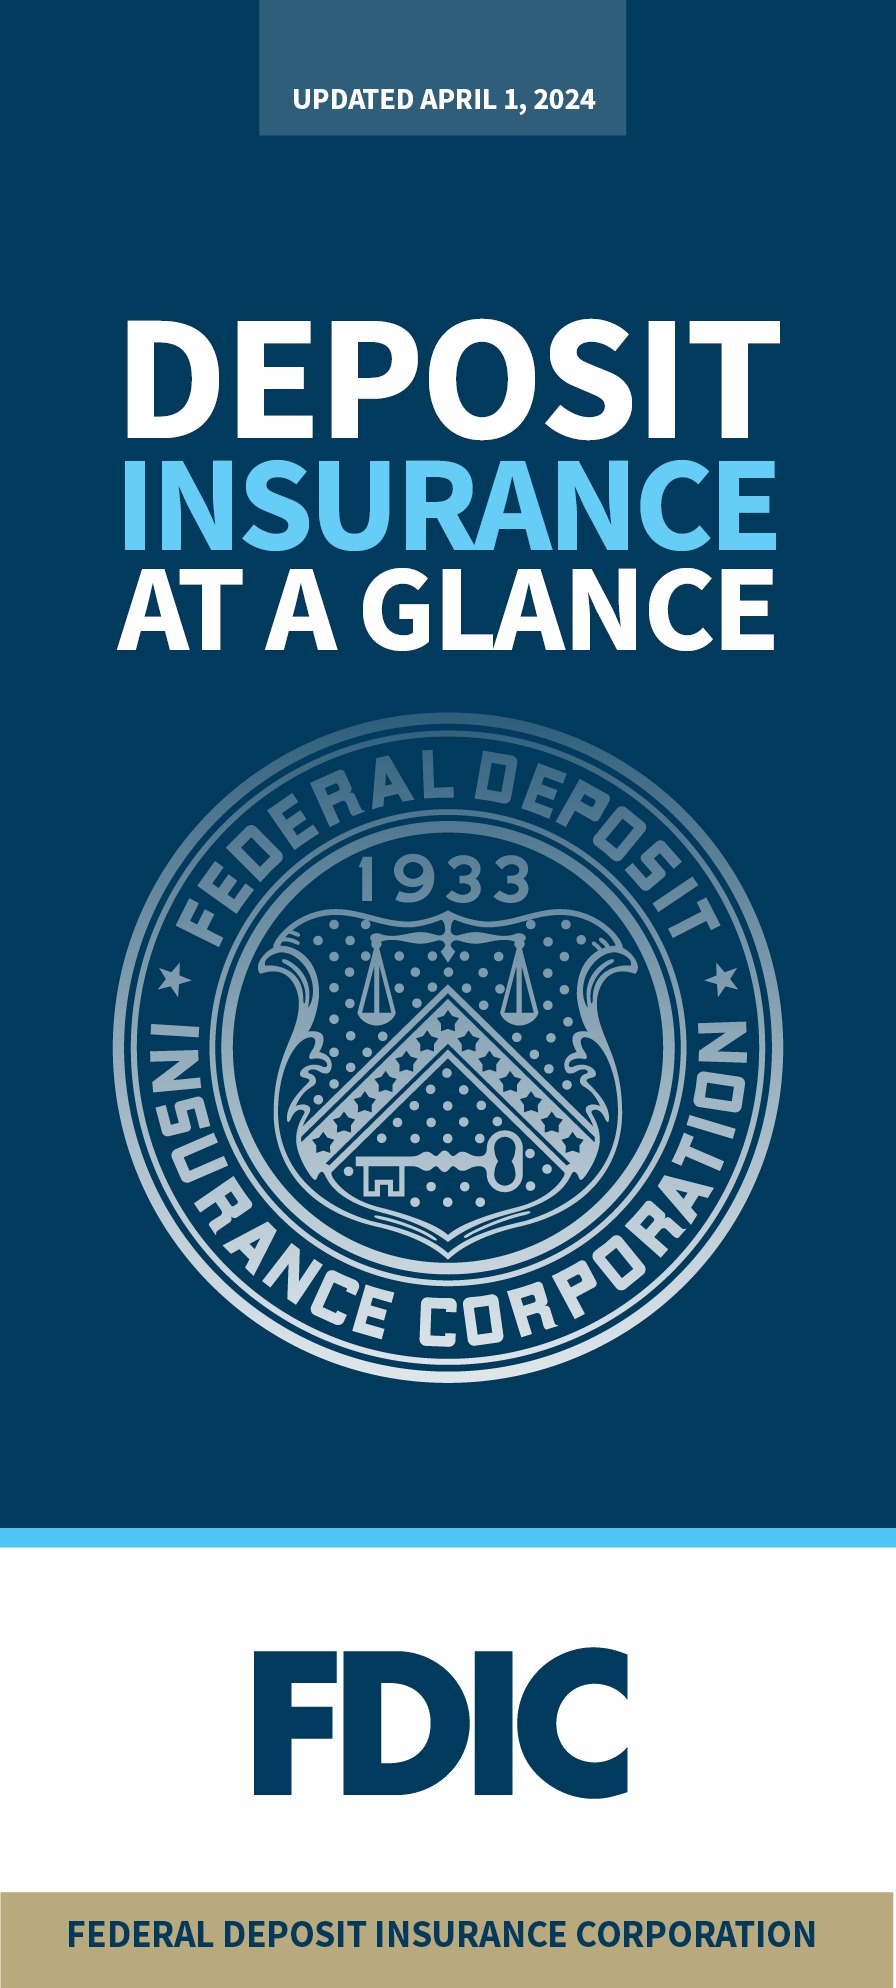 Cover art for Deposit Insurance at a Glance document